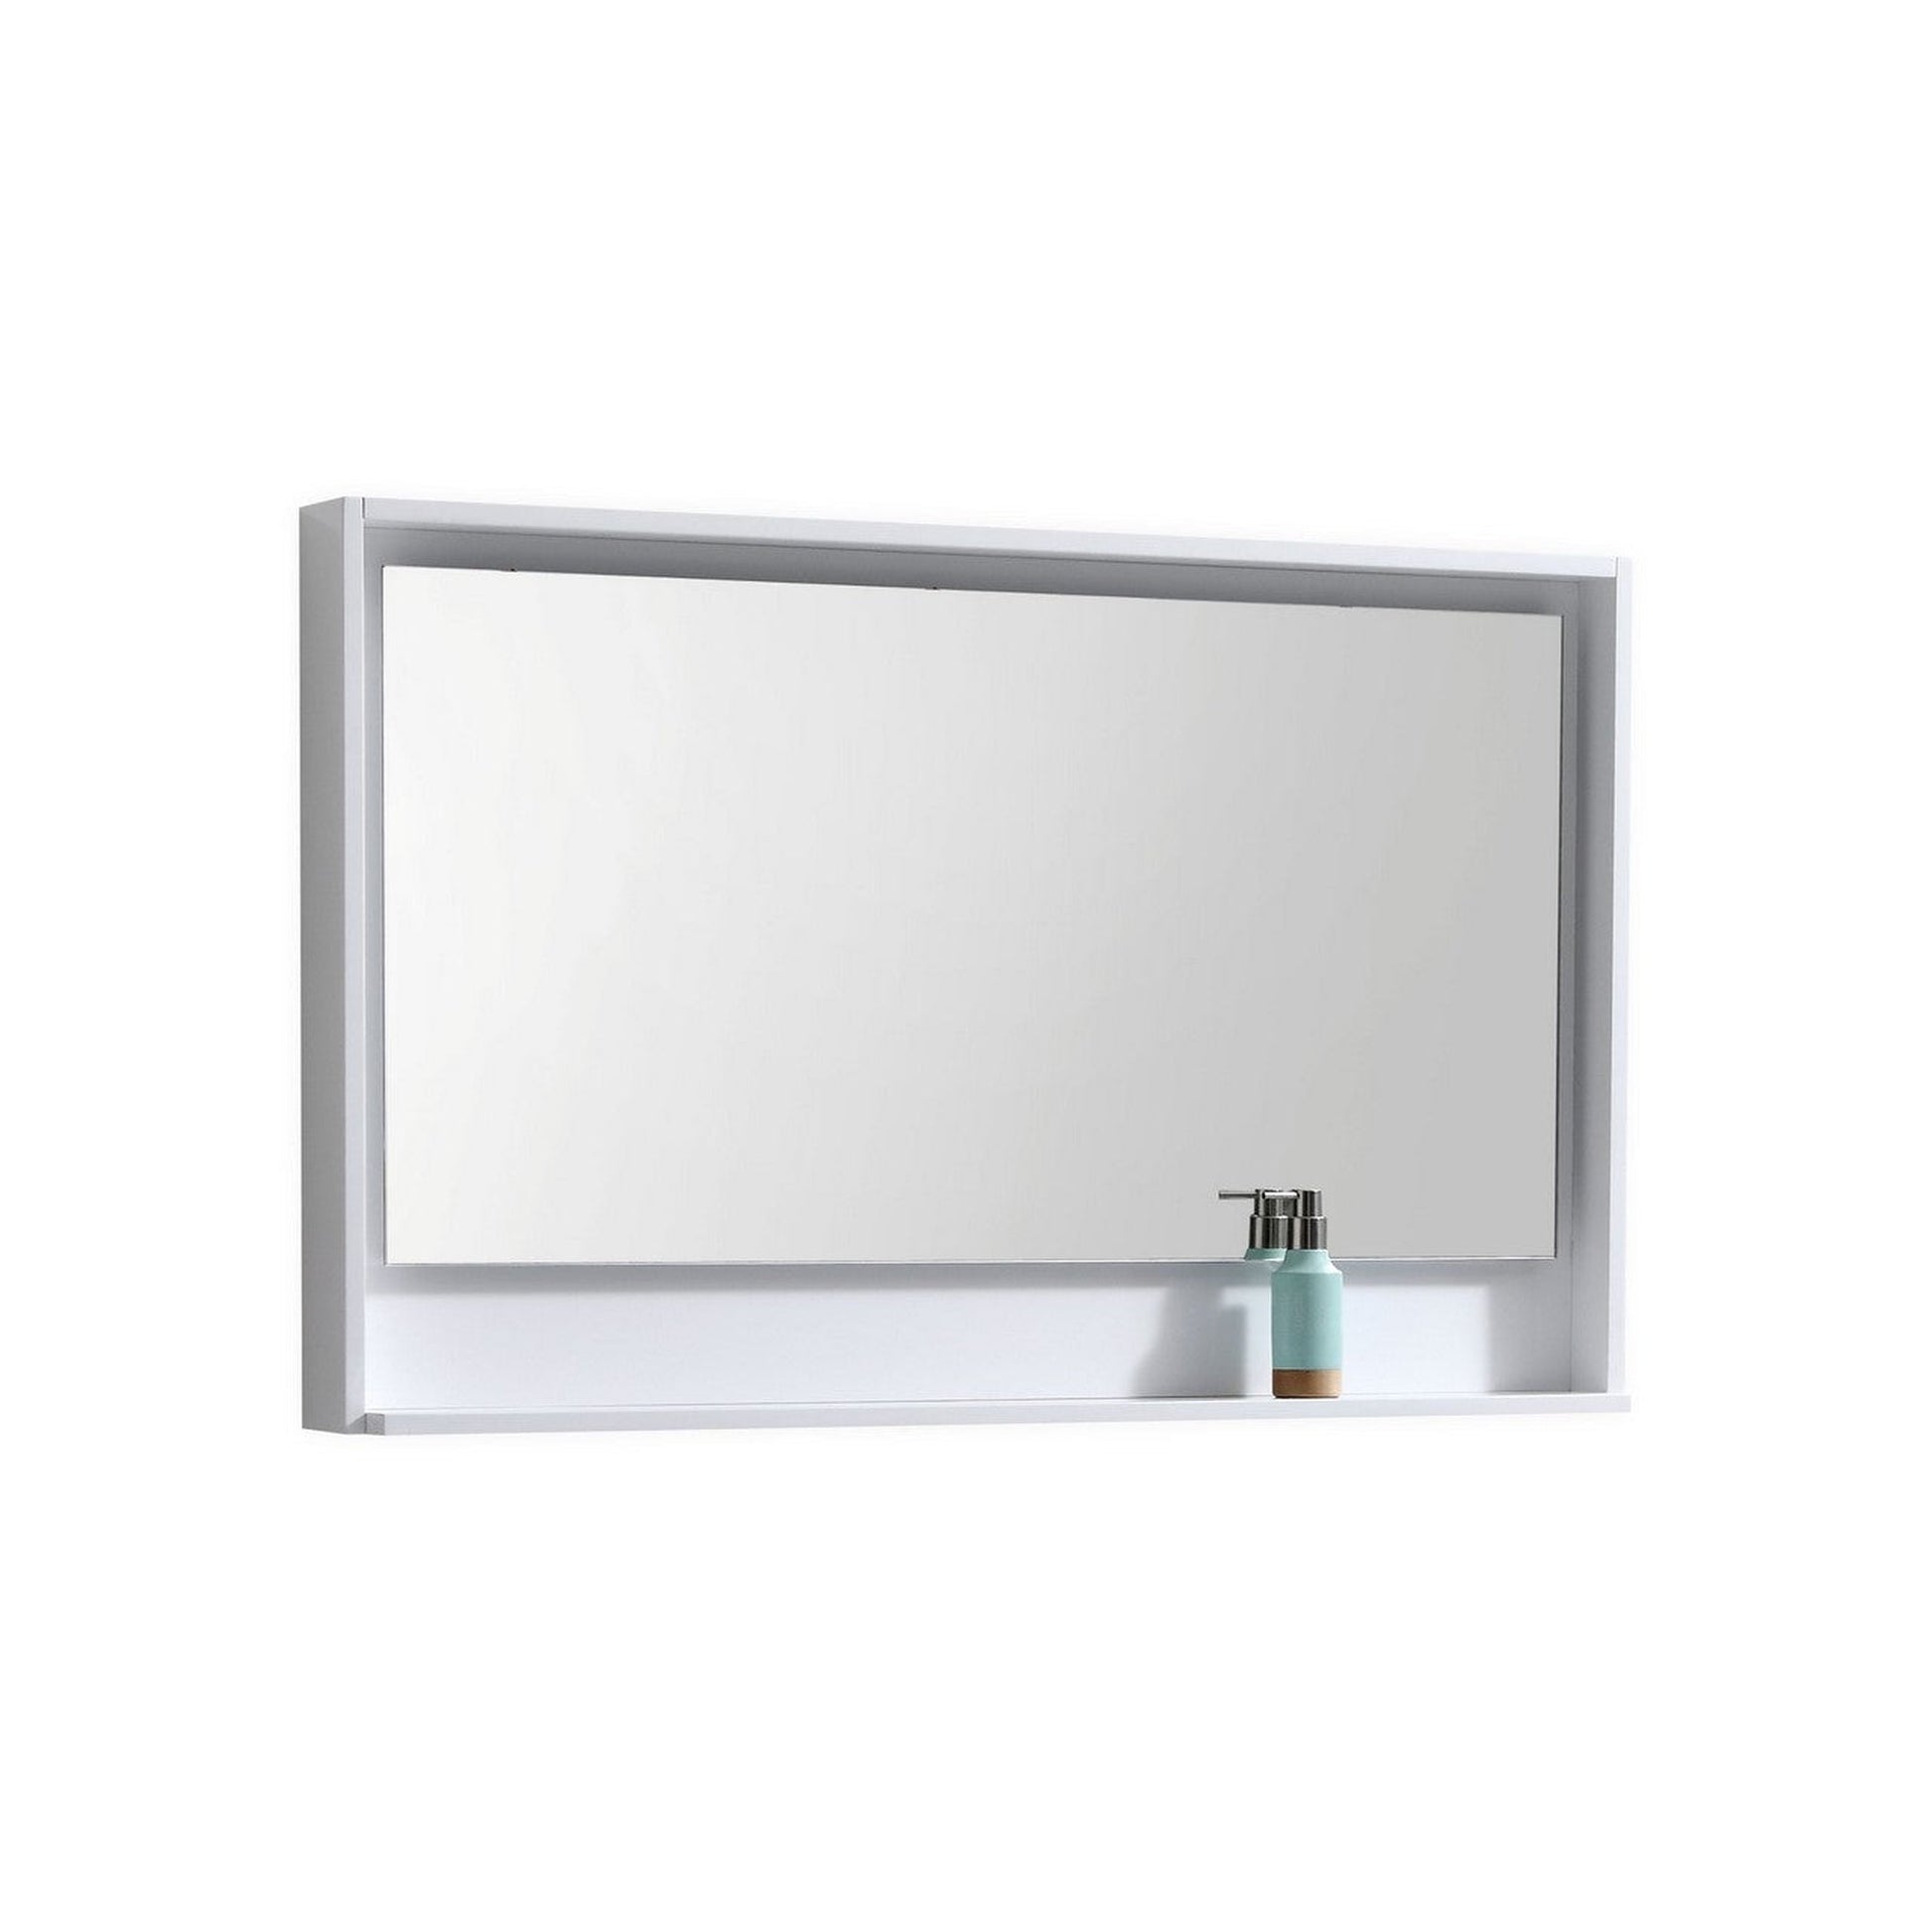 KubeBath DeLusso 48" Ocean Gray Wall-Mounted Modern Bathroom Vanity With Single Integrated Acrylic Sink With Overflow and 48" White Framed Mirror With Shelf